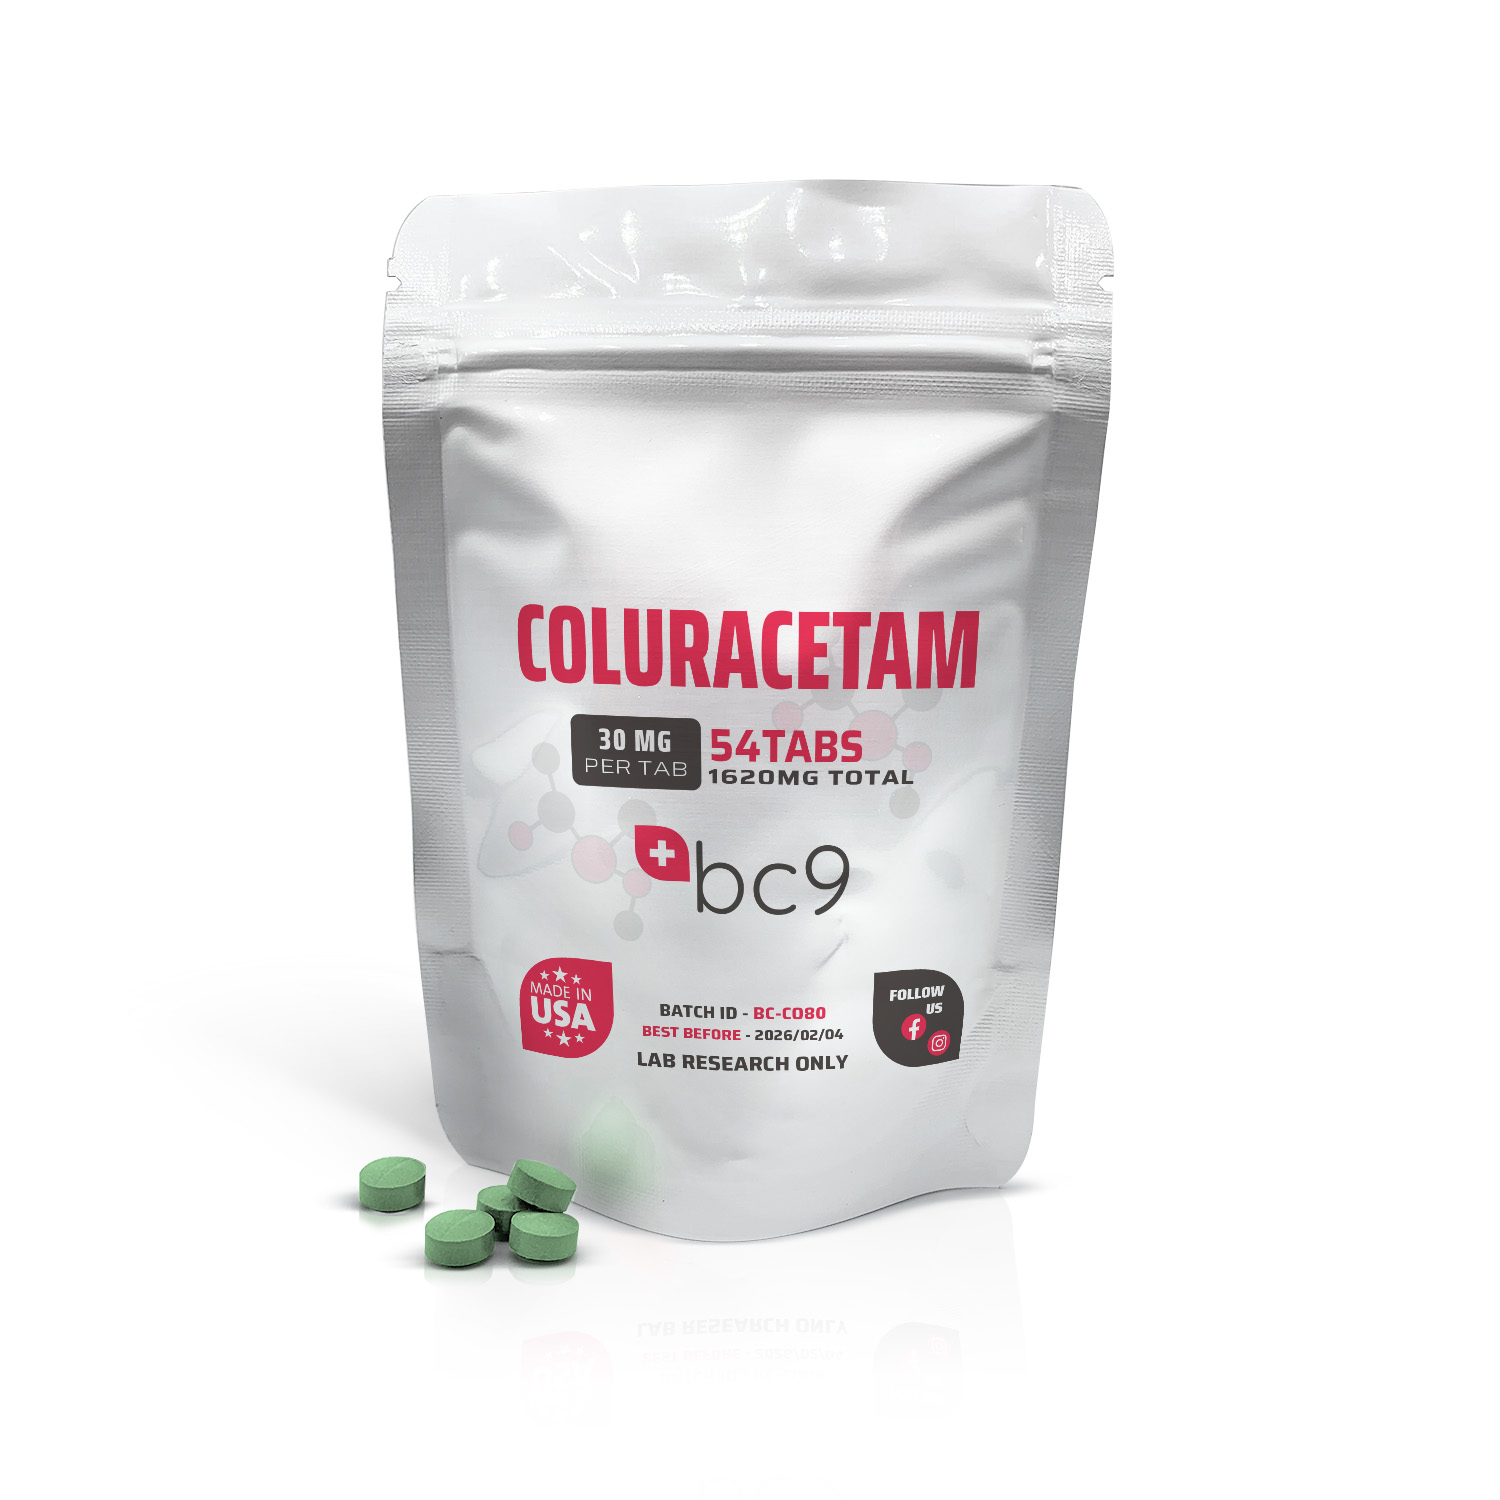 Coluracetam Tablets For Sale | Fast Shipping | BC9.org